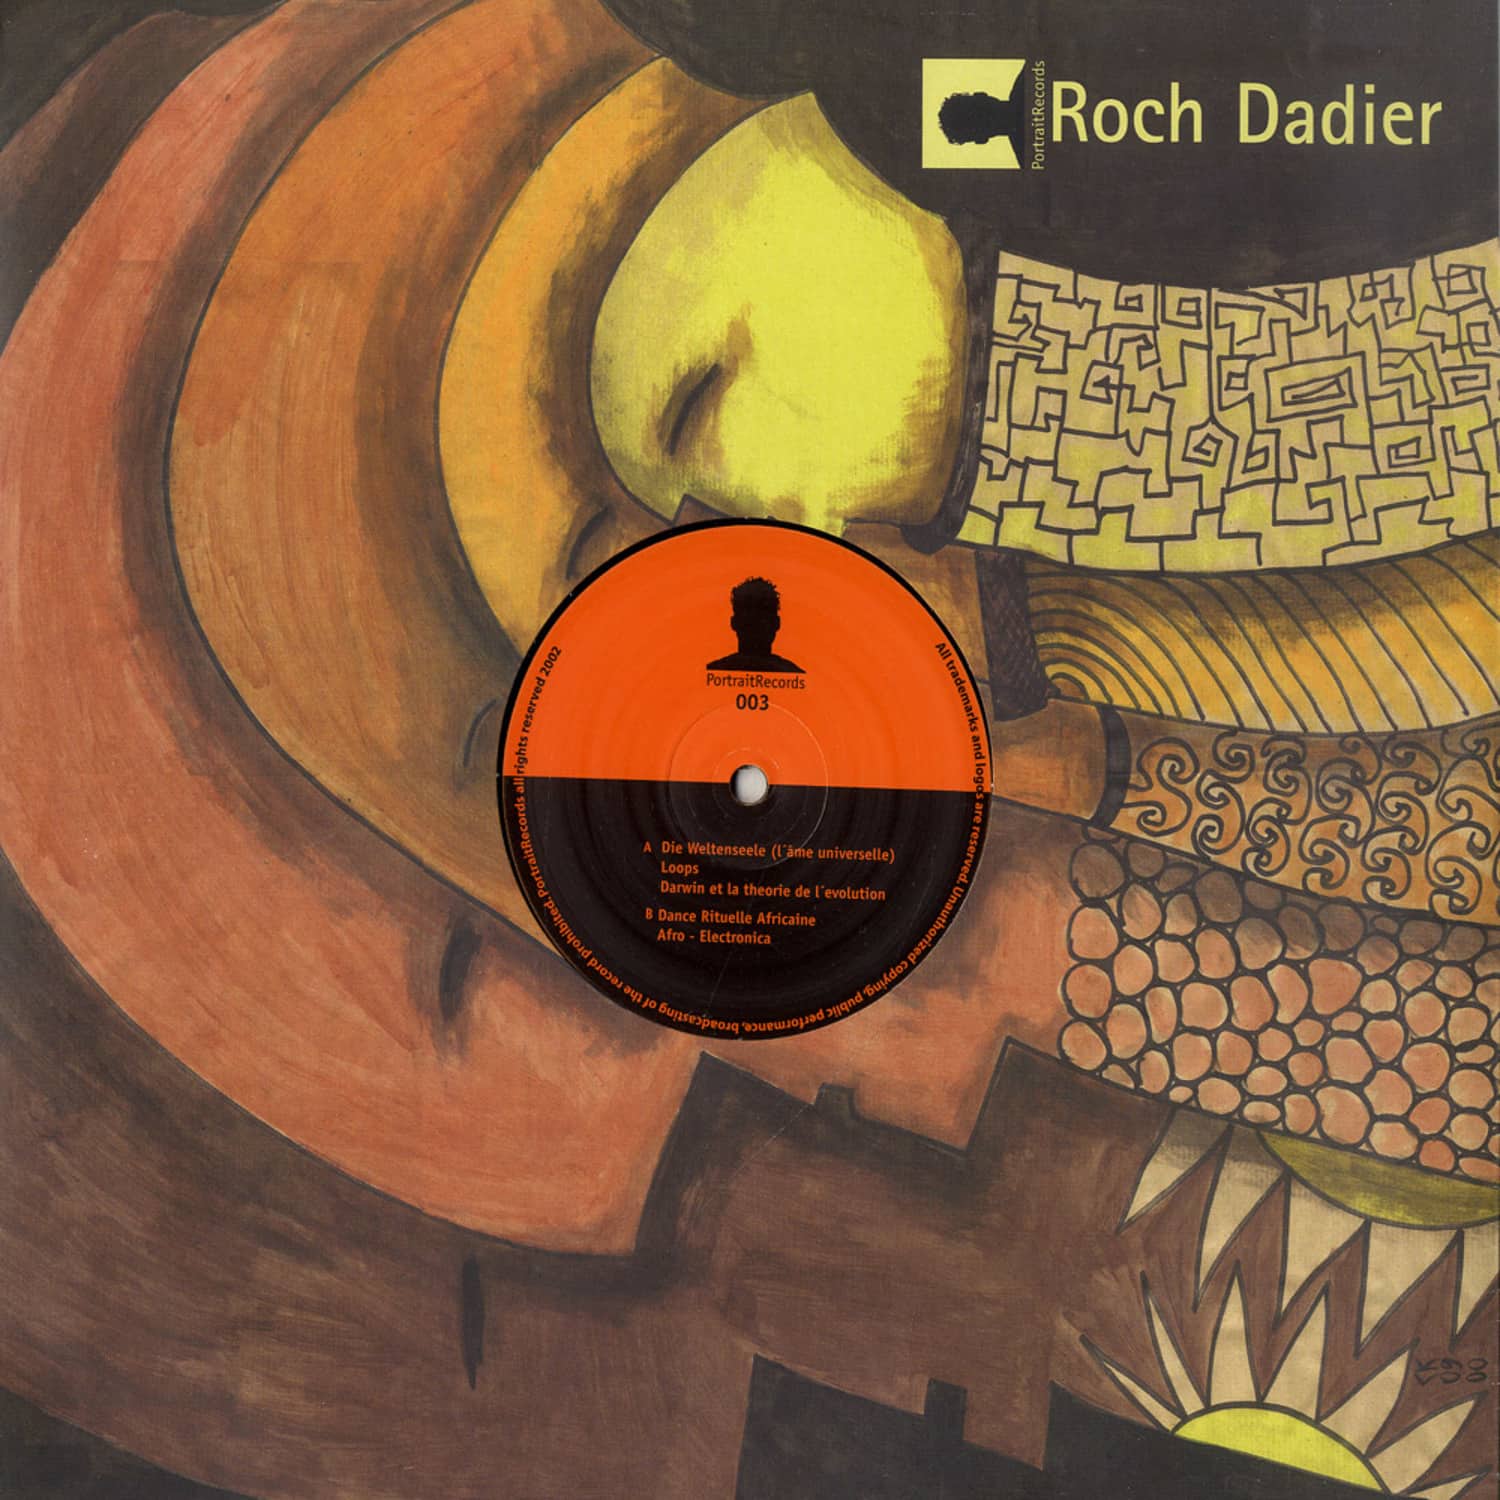 Roch Dadier - WHERE AM I FROM EP